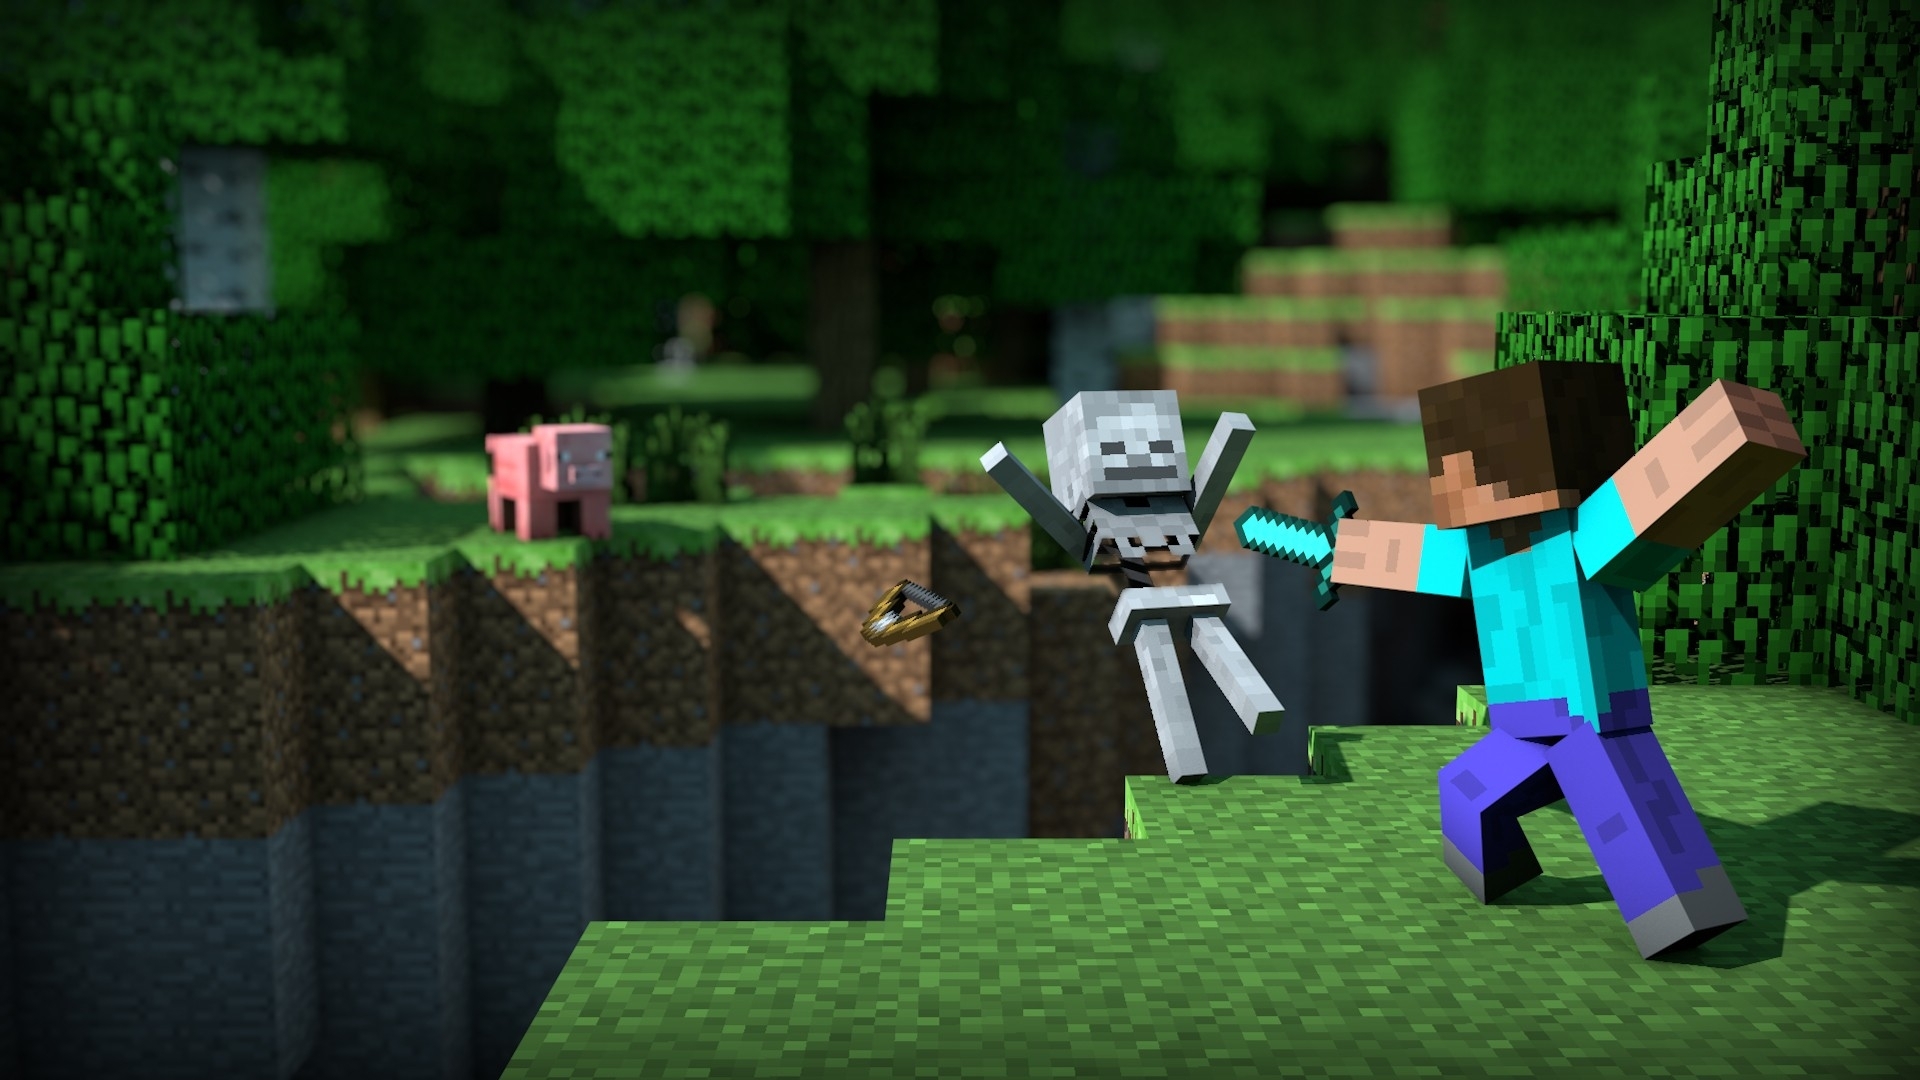 1280x720px Minecraft Backgrounds For PC 202.65 KB #370977